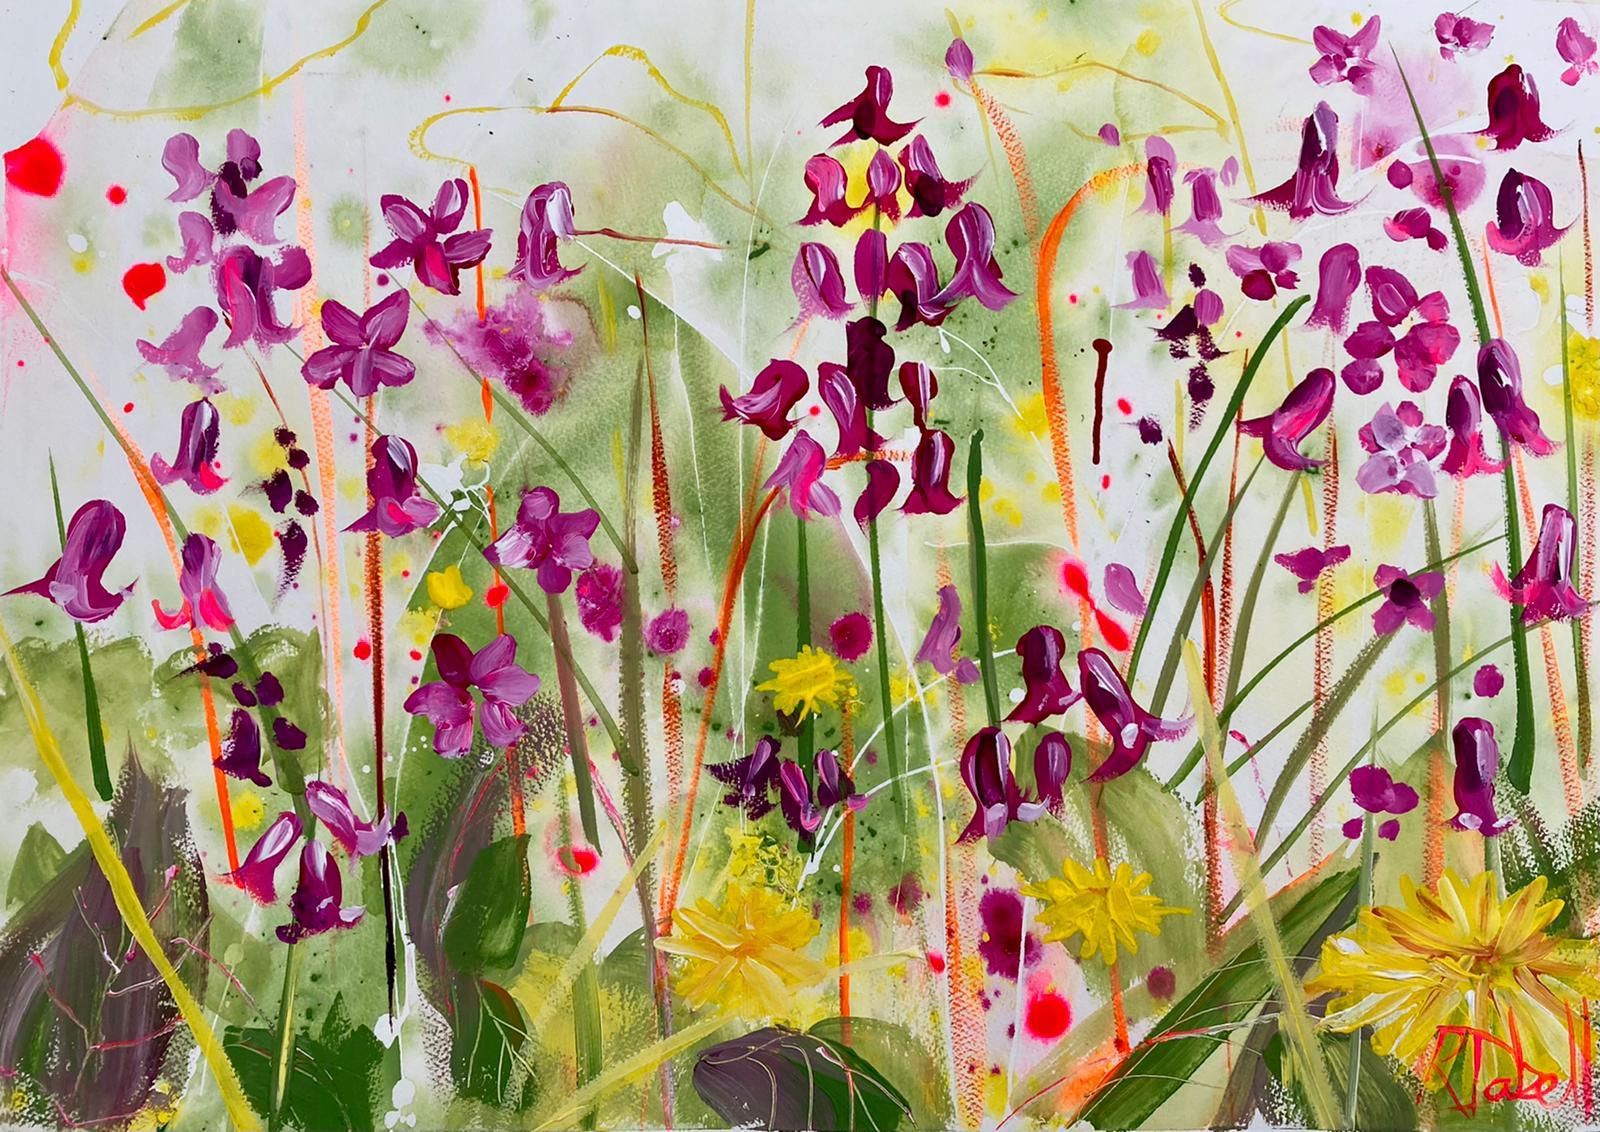 Late Spring by Rachael Dalzell. Acrylic on paper. White wood frame